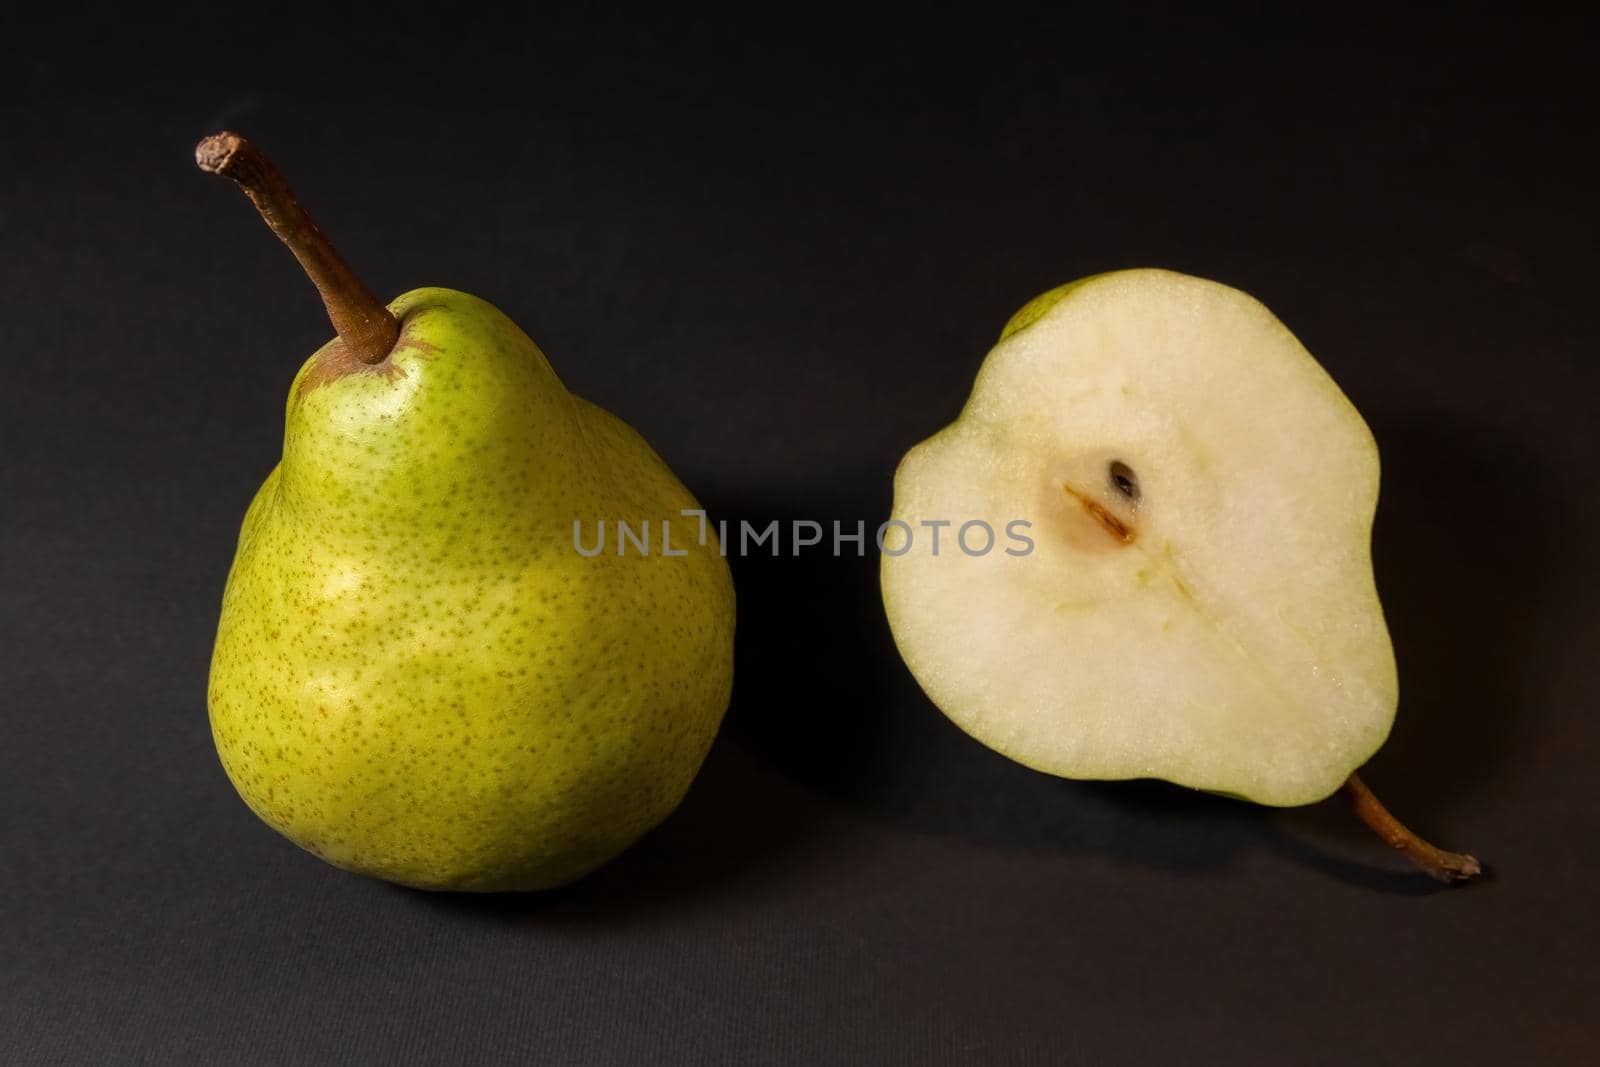 Two ripe green pears on a dark background, late november pear variety. Whole pear and cut in half